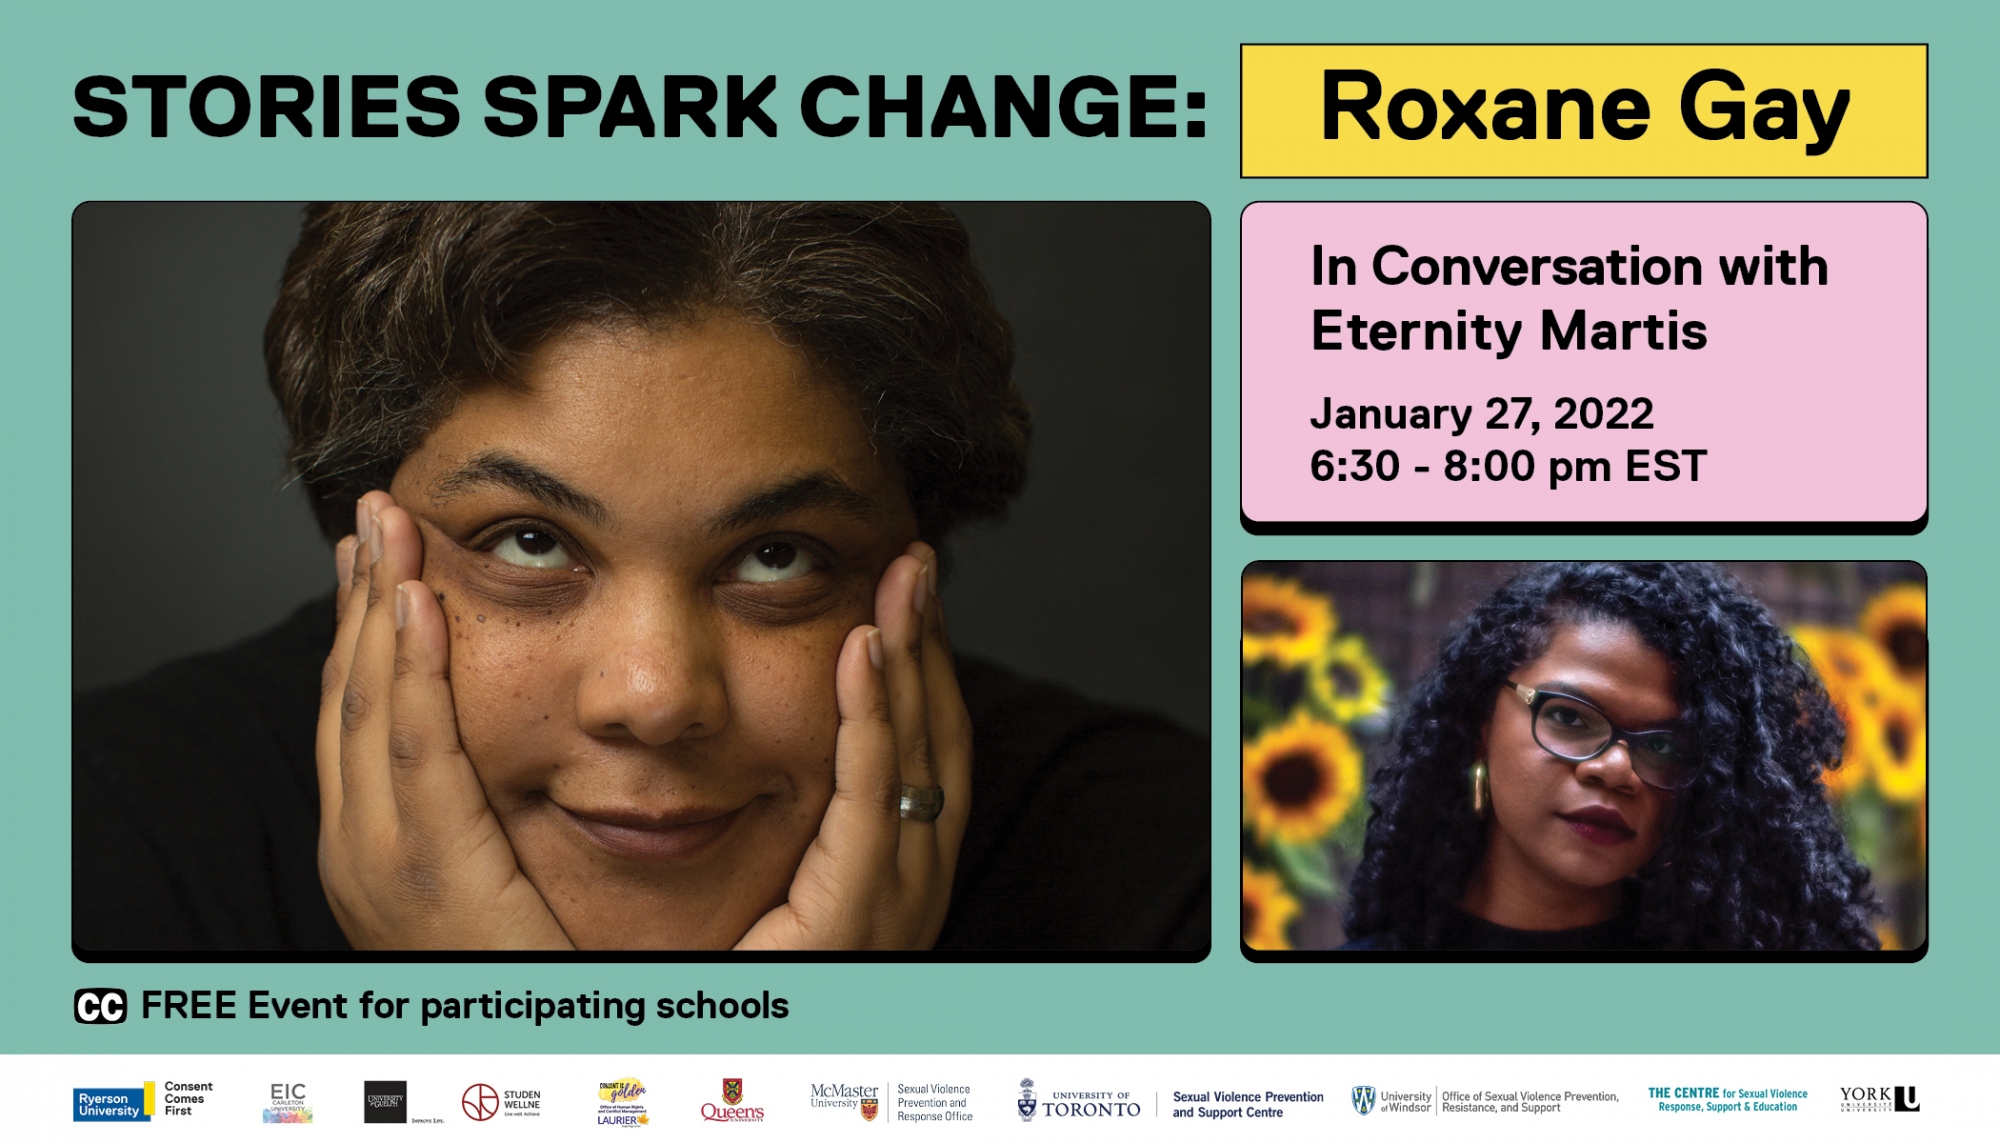 Stories Spark Change with Roxane Gay and Eternity Martis